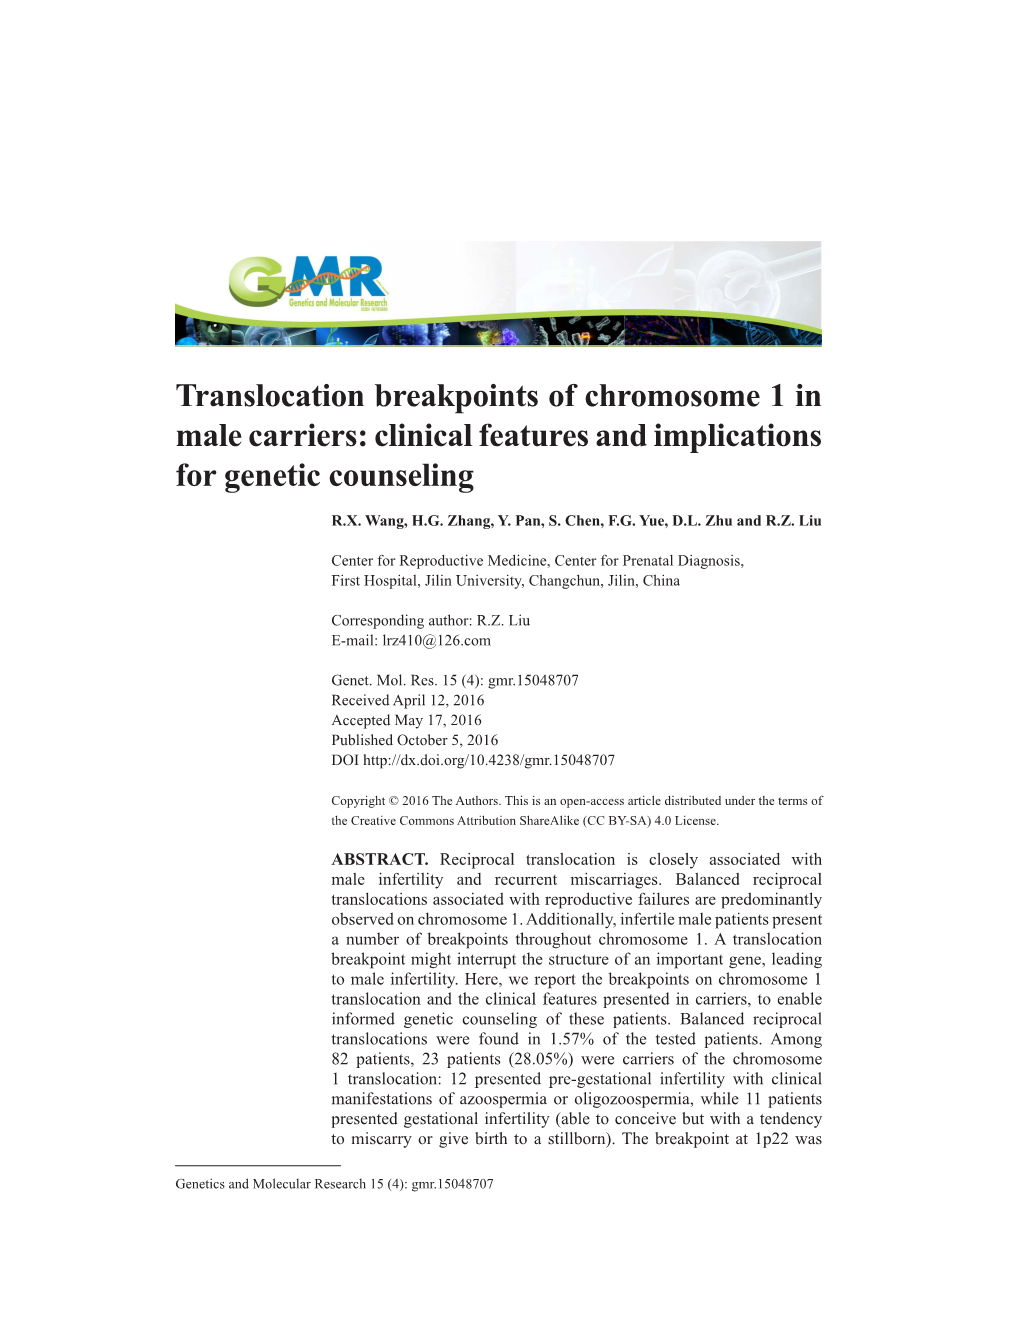 Translocation Breakpoints of Chromosome 1 in Male Carriers: Clinical Features and Implications for Genetic Counseling